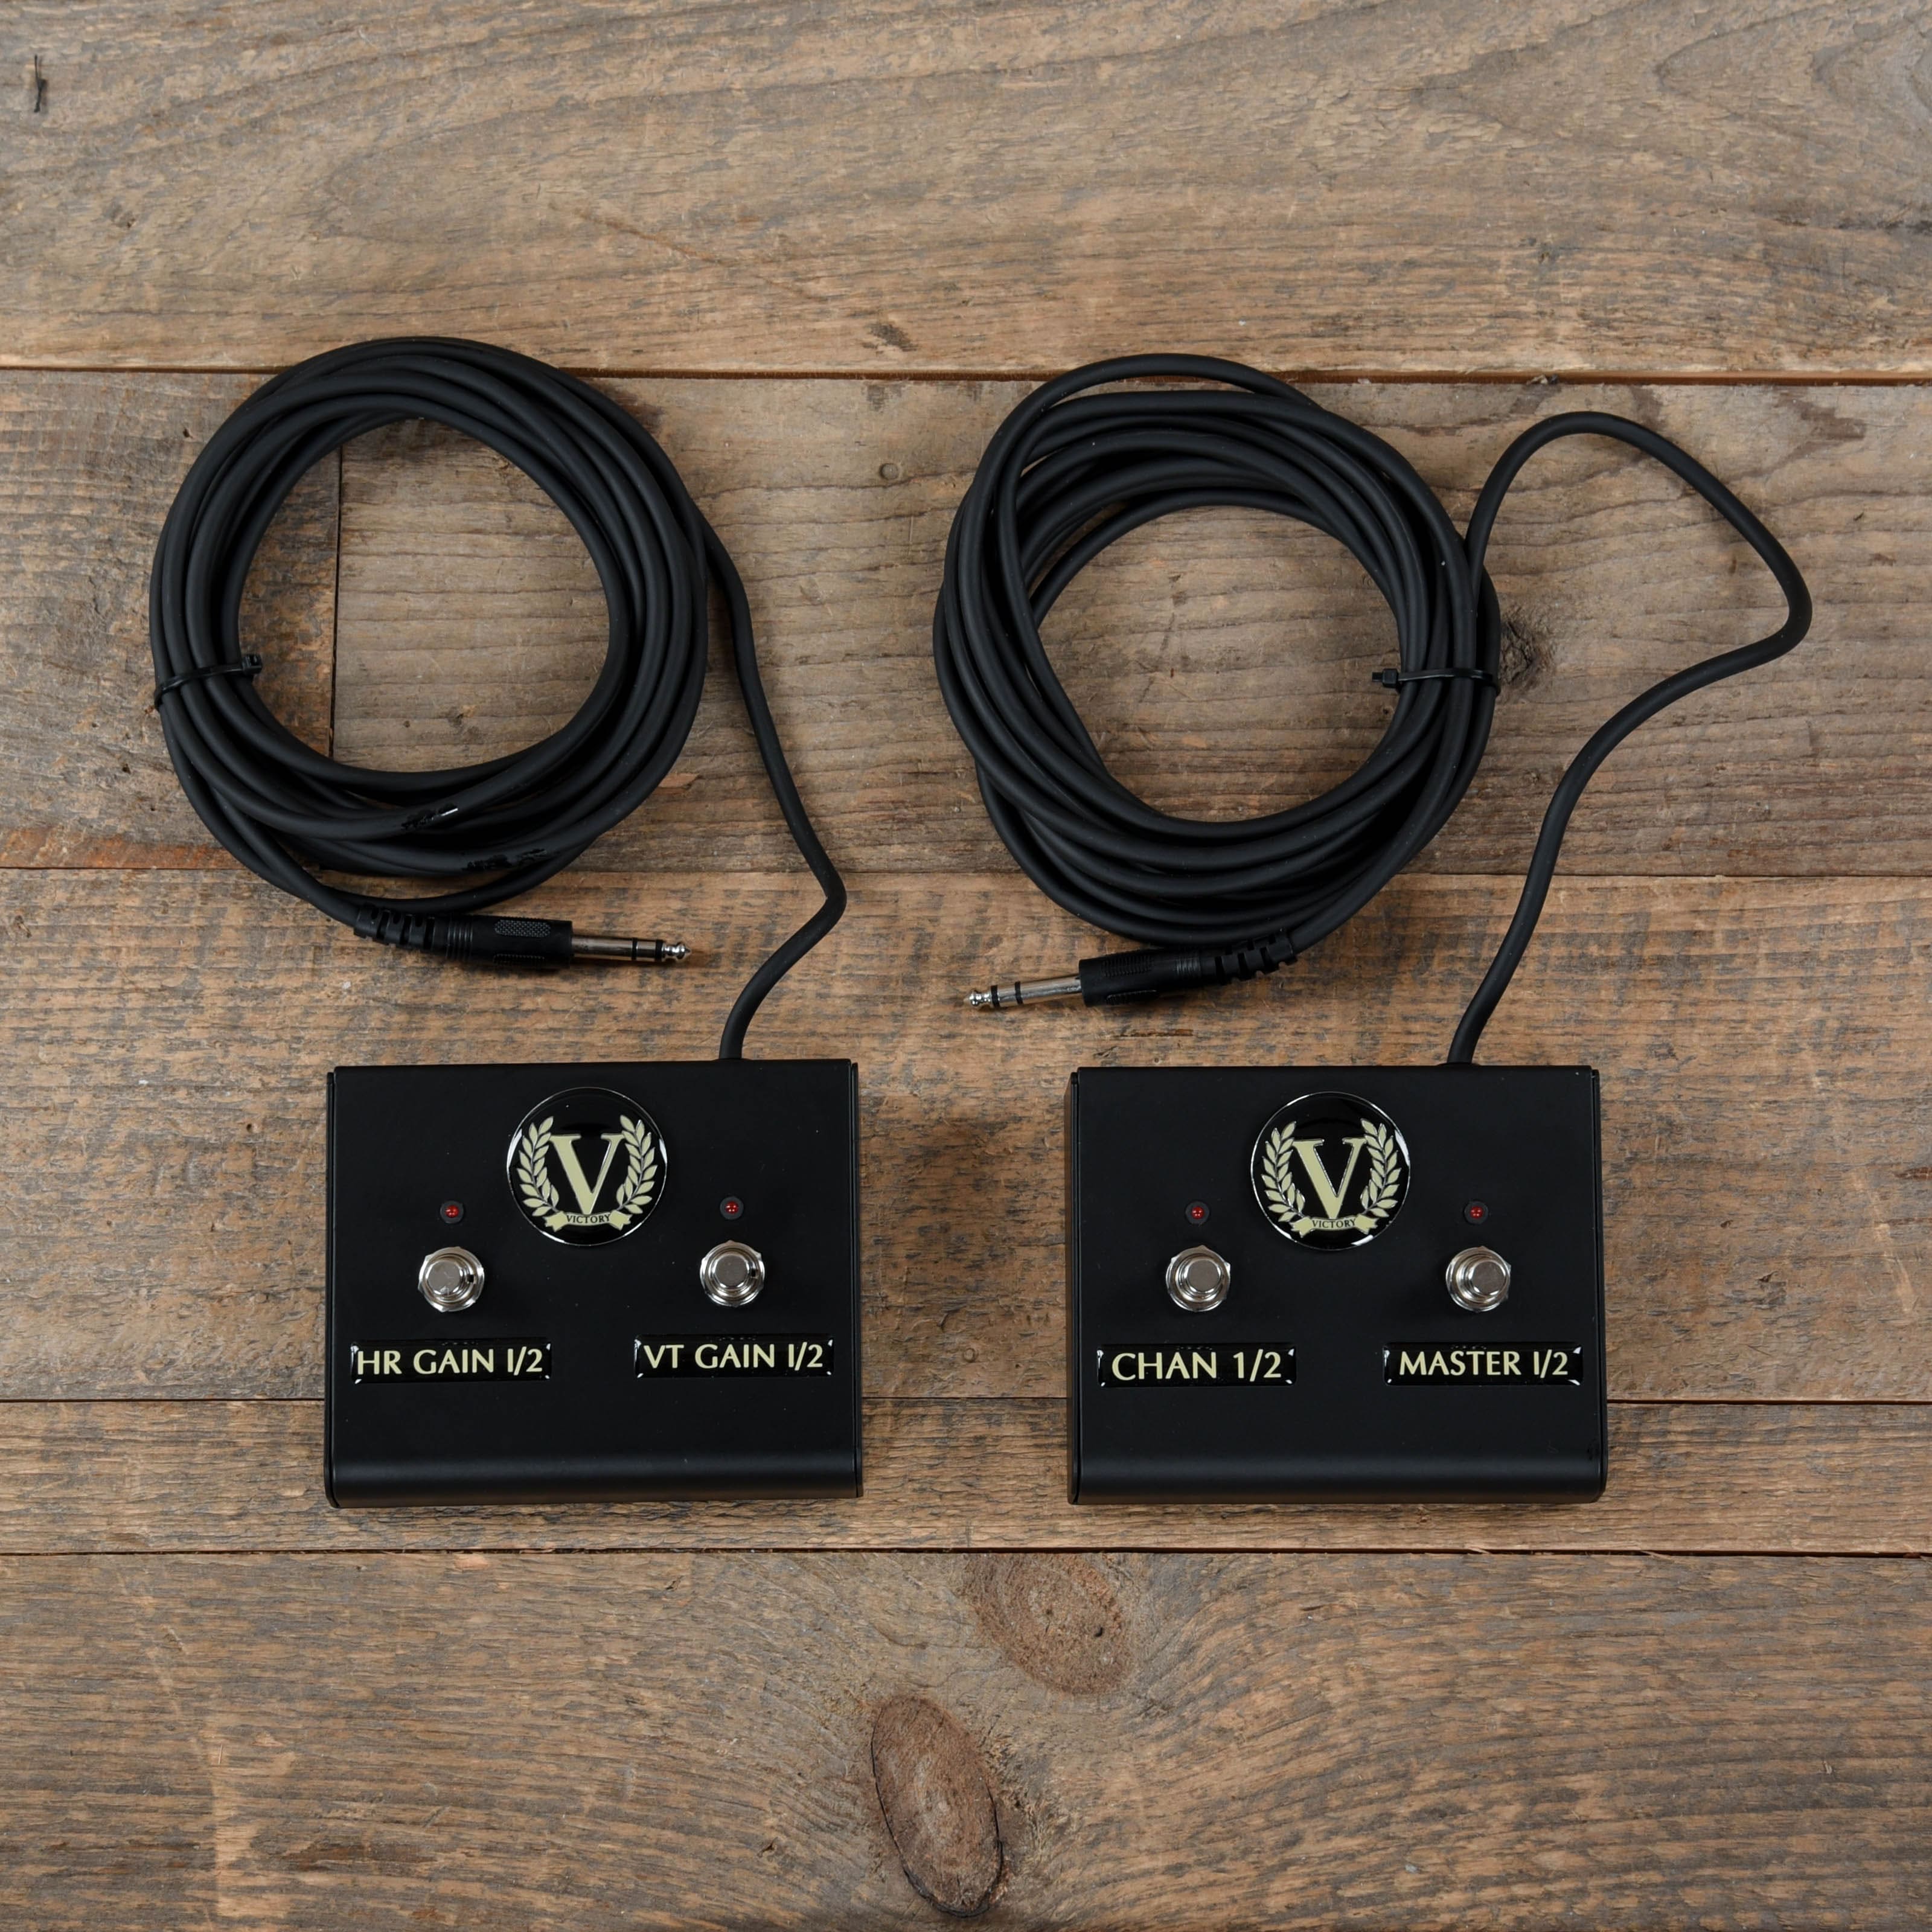 Victory Sheriff 100 Compact Head Amps / Guitar Heads